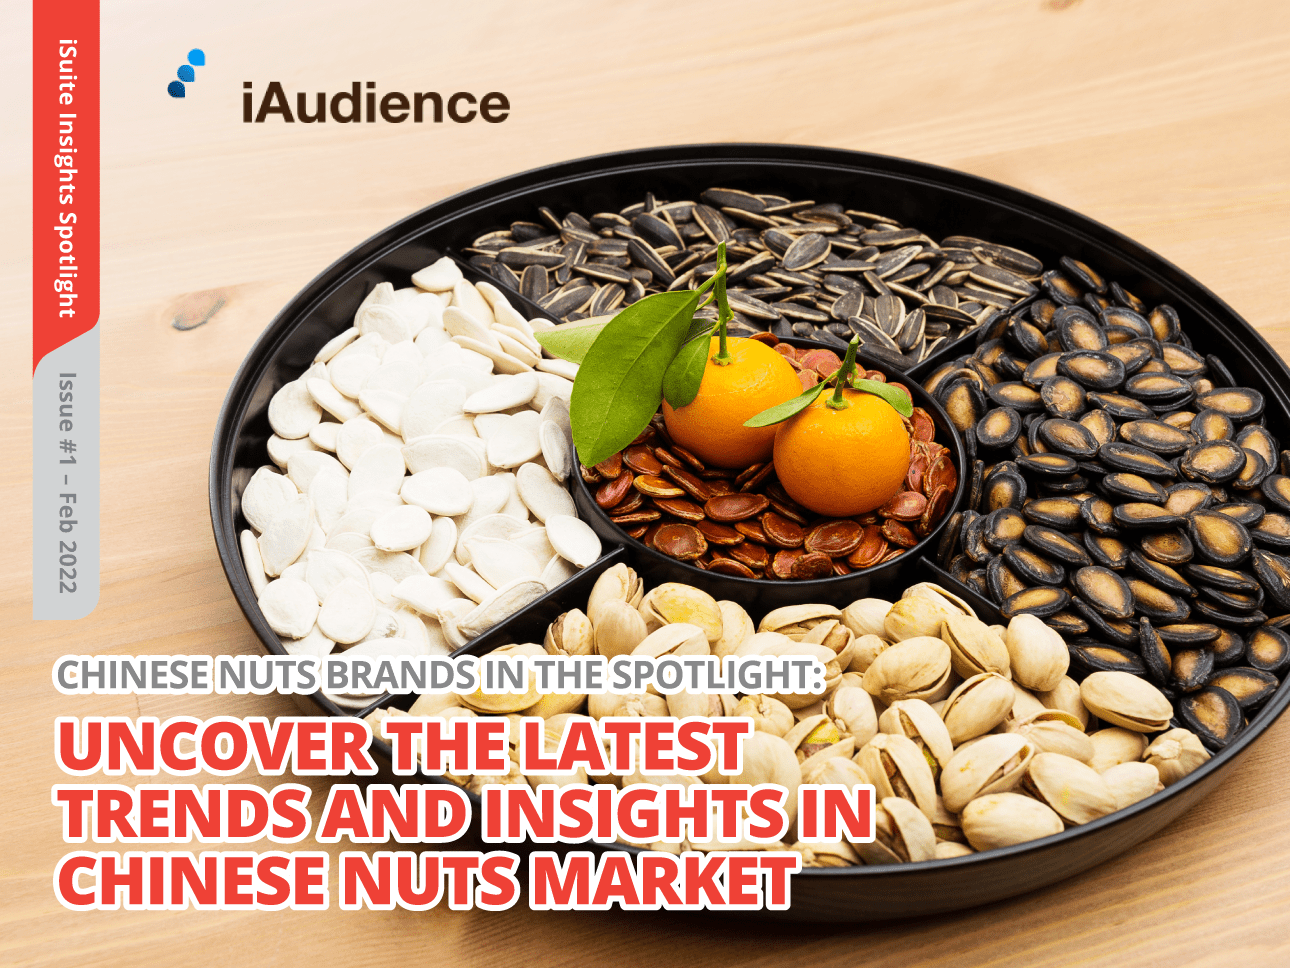 iSuite Insights Spotlight – Issue #1: Uncover the Latest Trends and Insights in Chinese Nuts Market